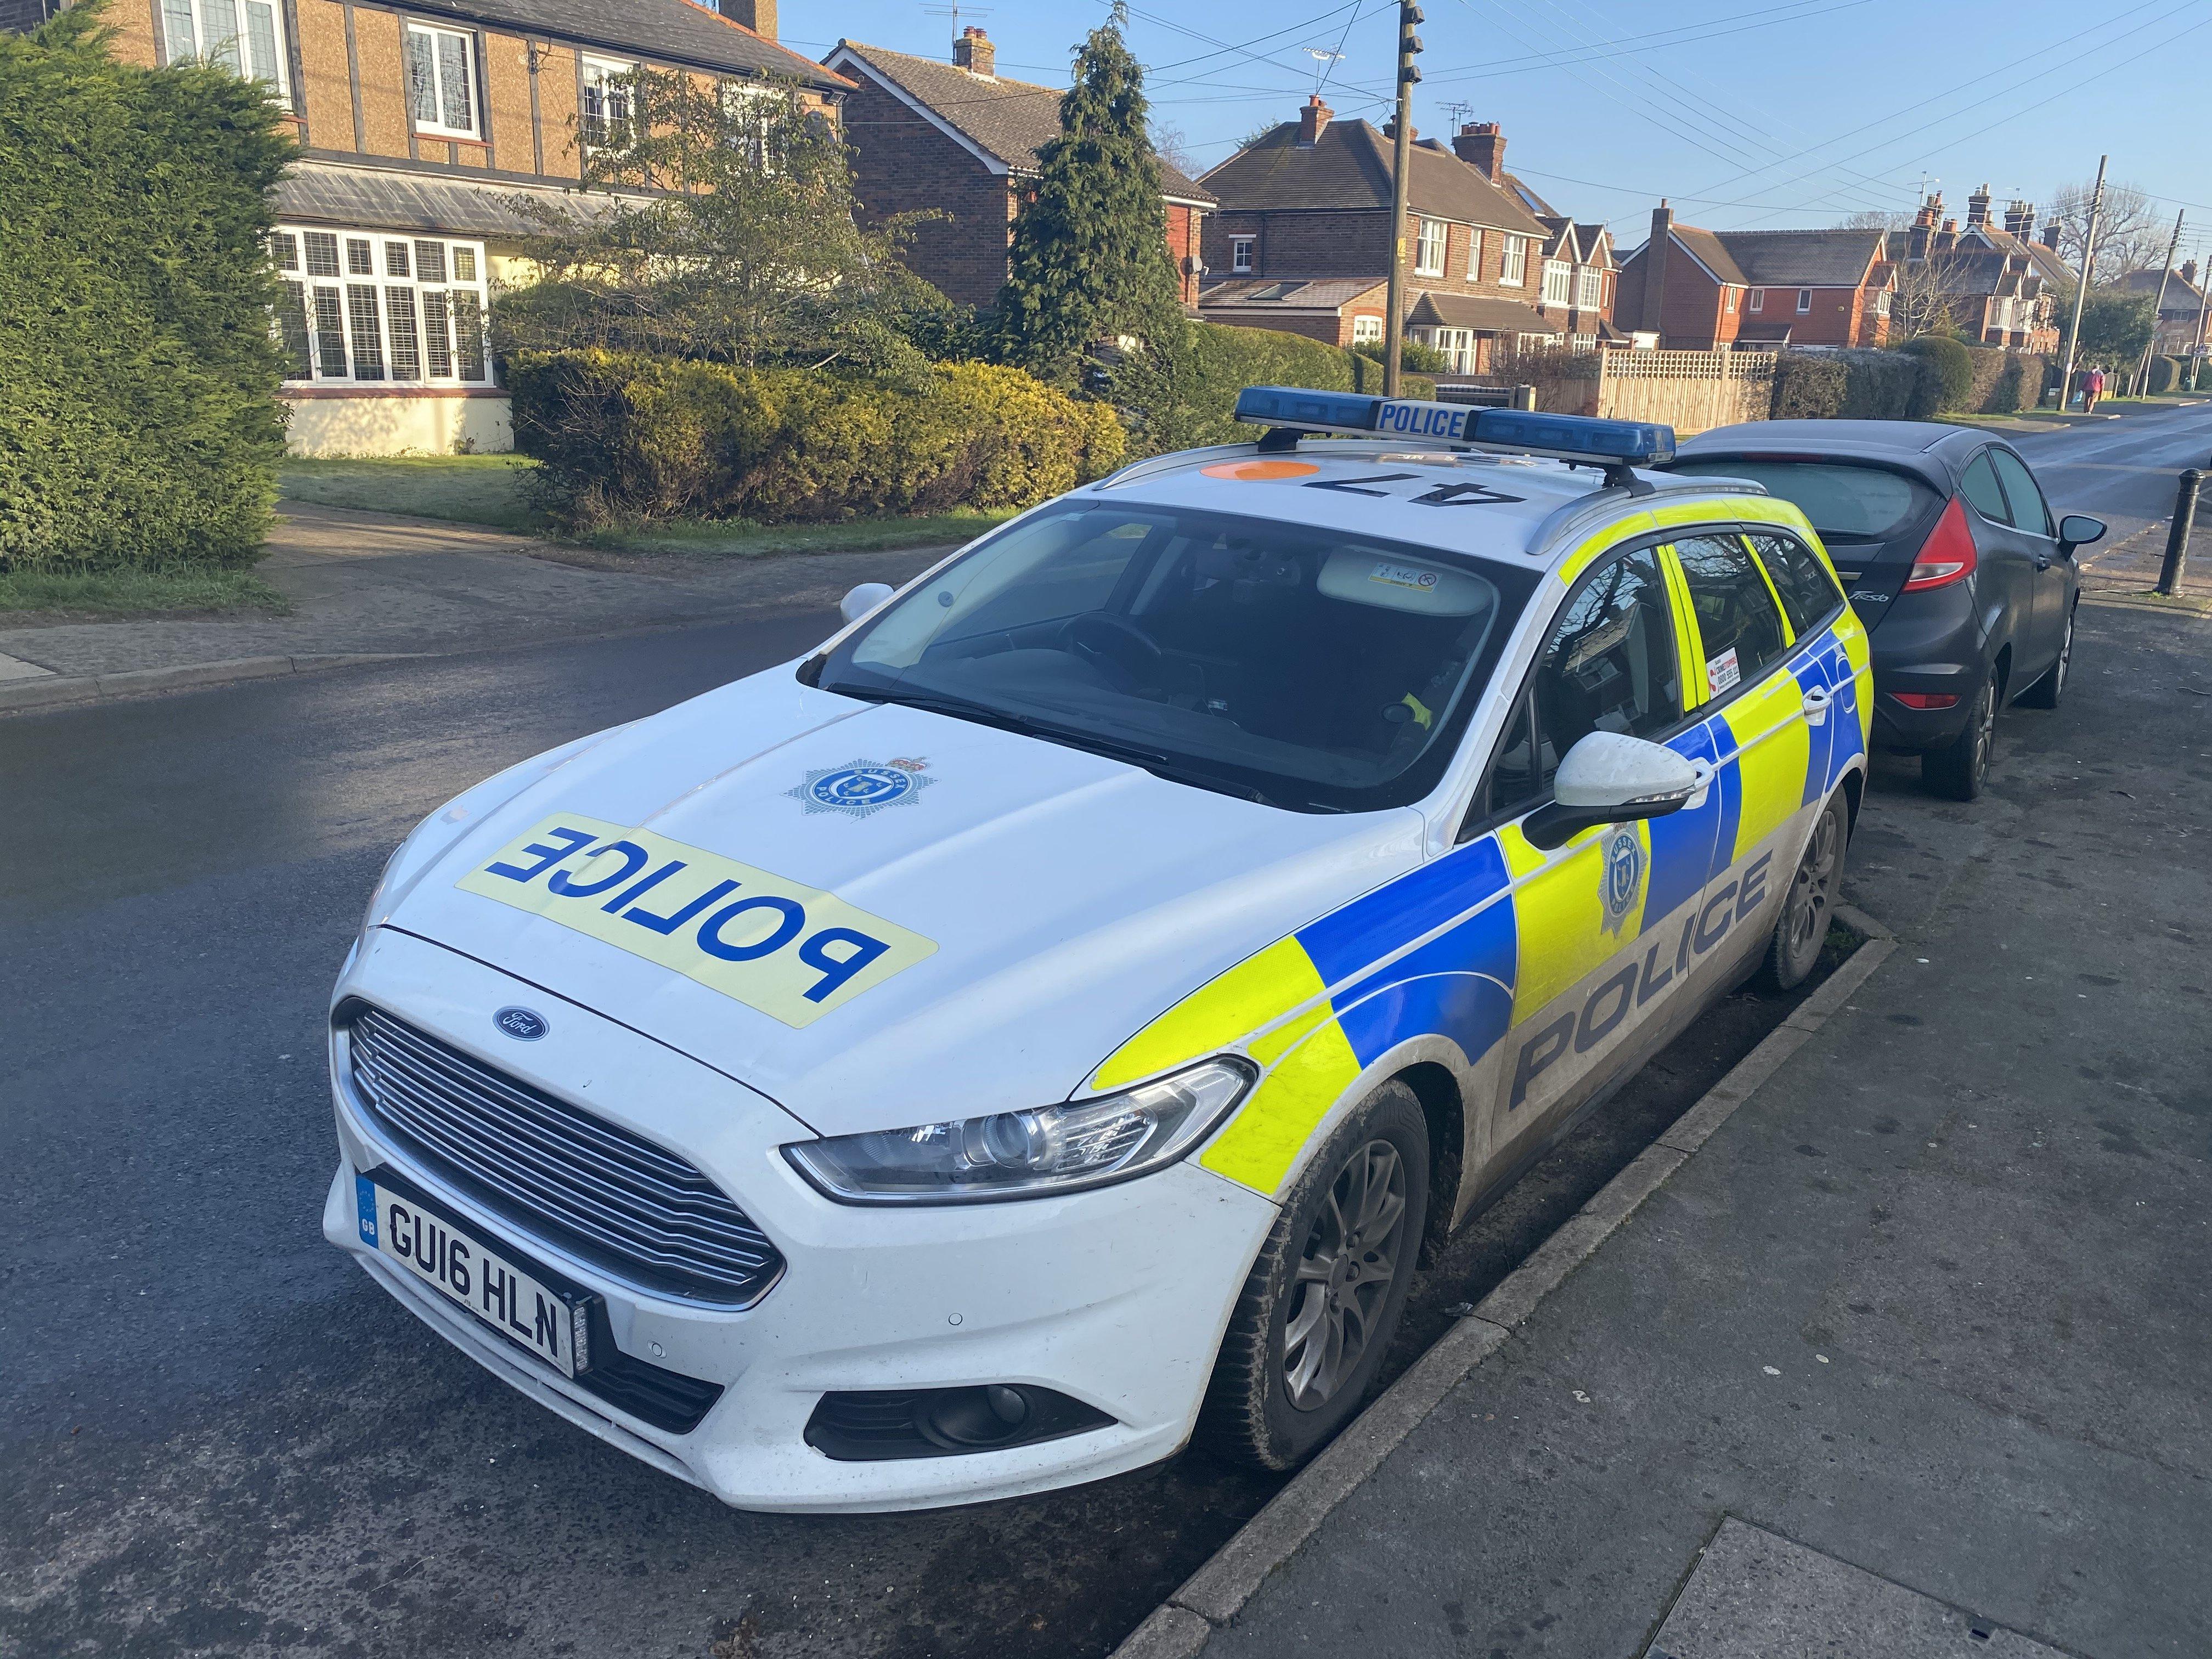 The police incident in Partridge Green